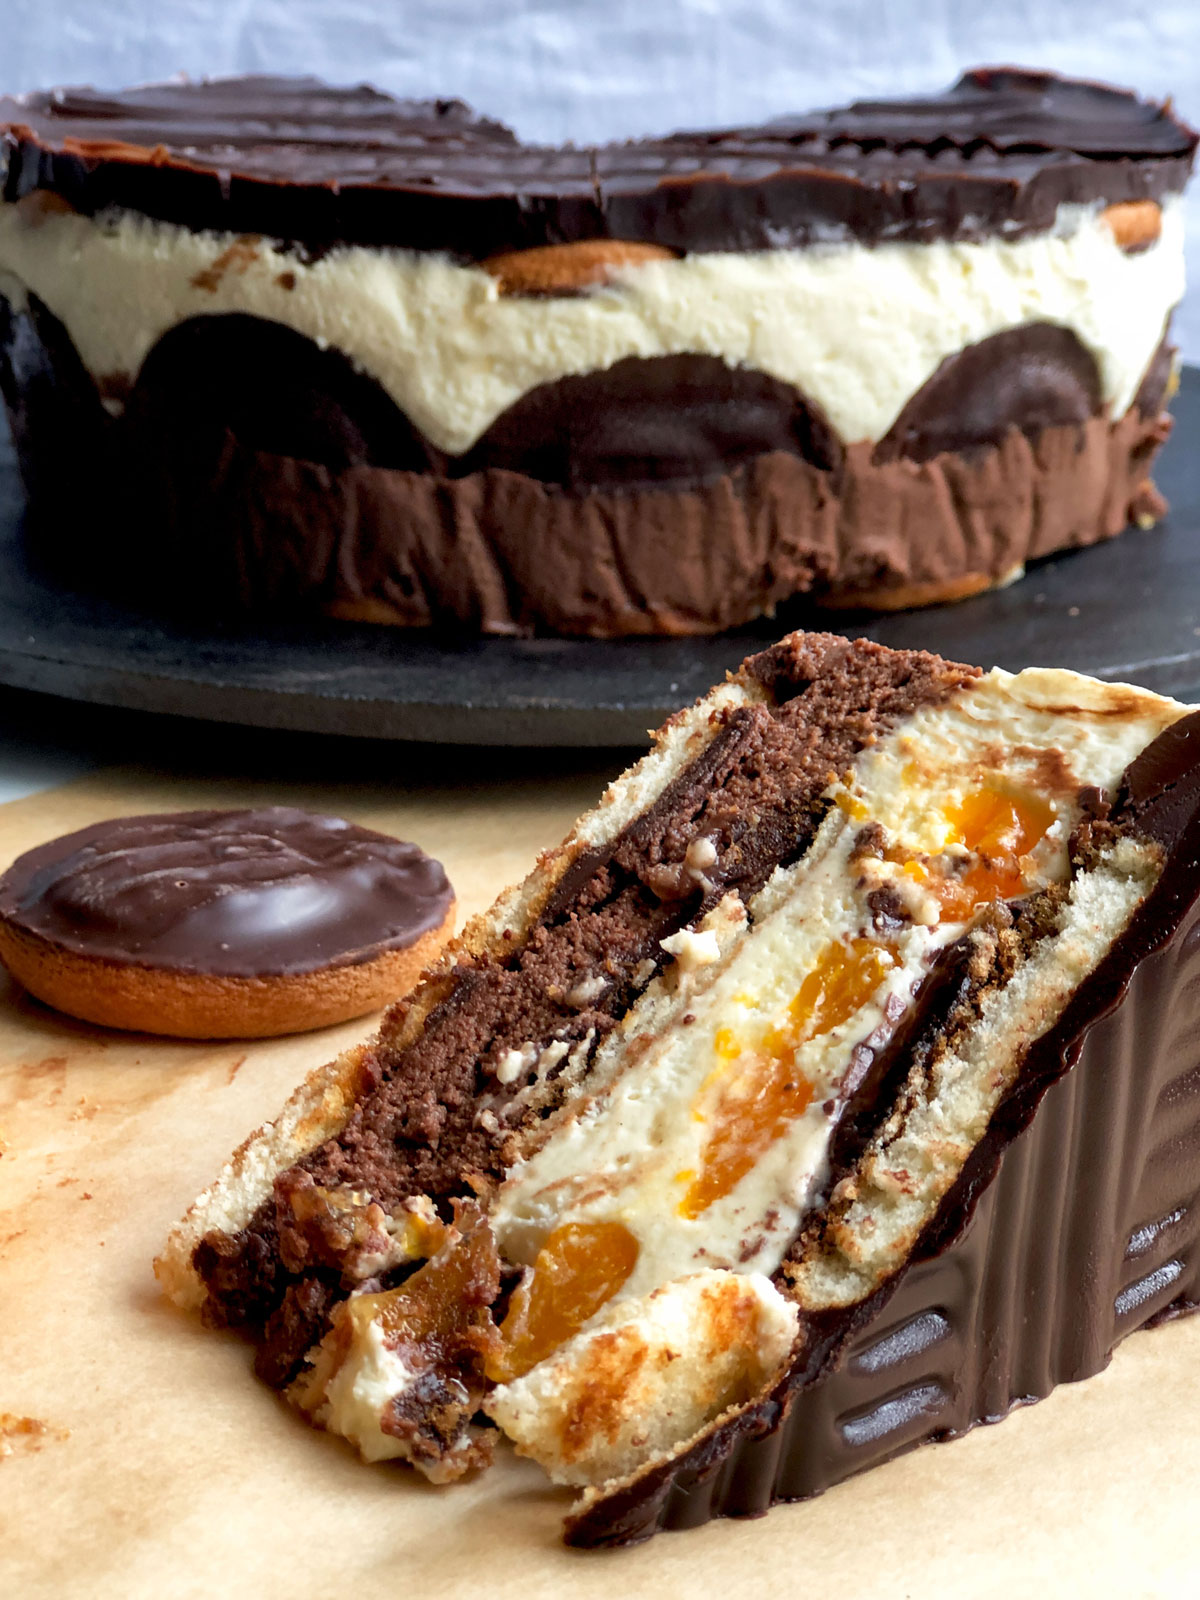 A slice of no-bake cake made of layers of Jaffa cakes, whipped cream and fruit.